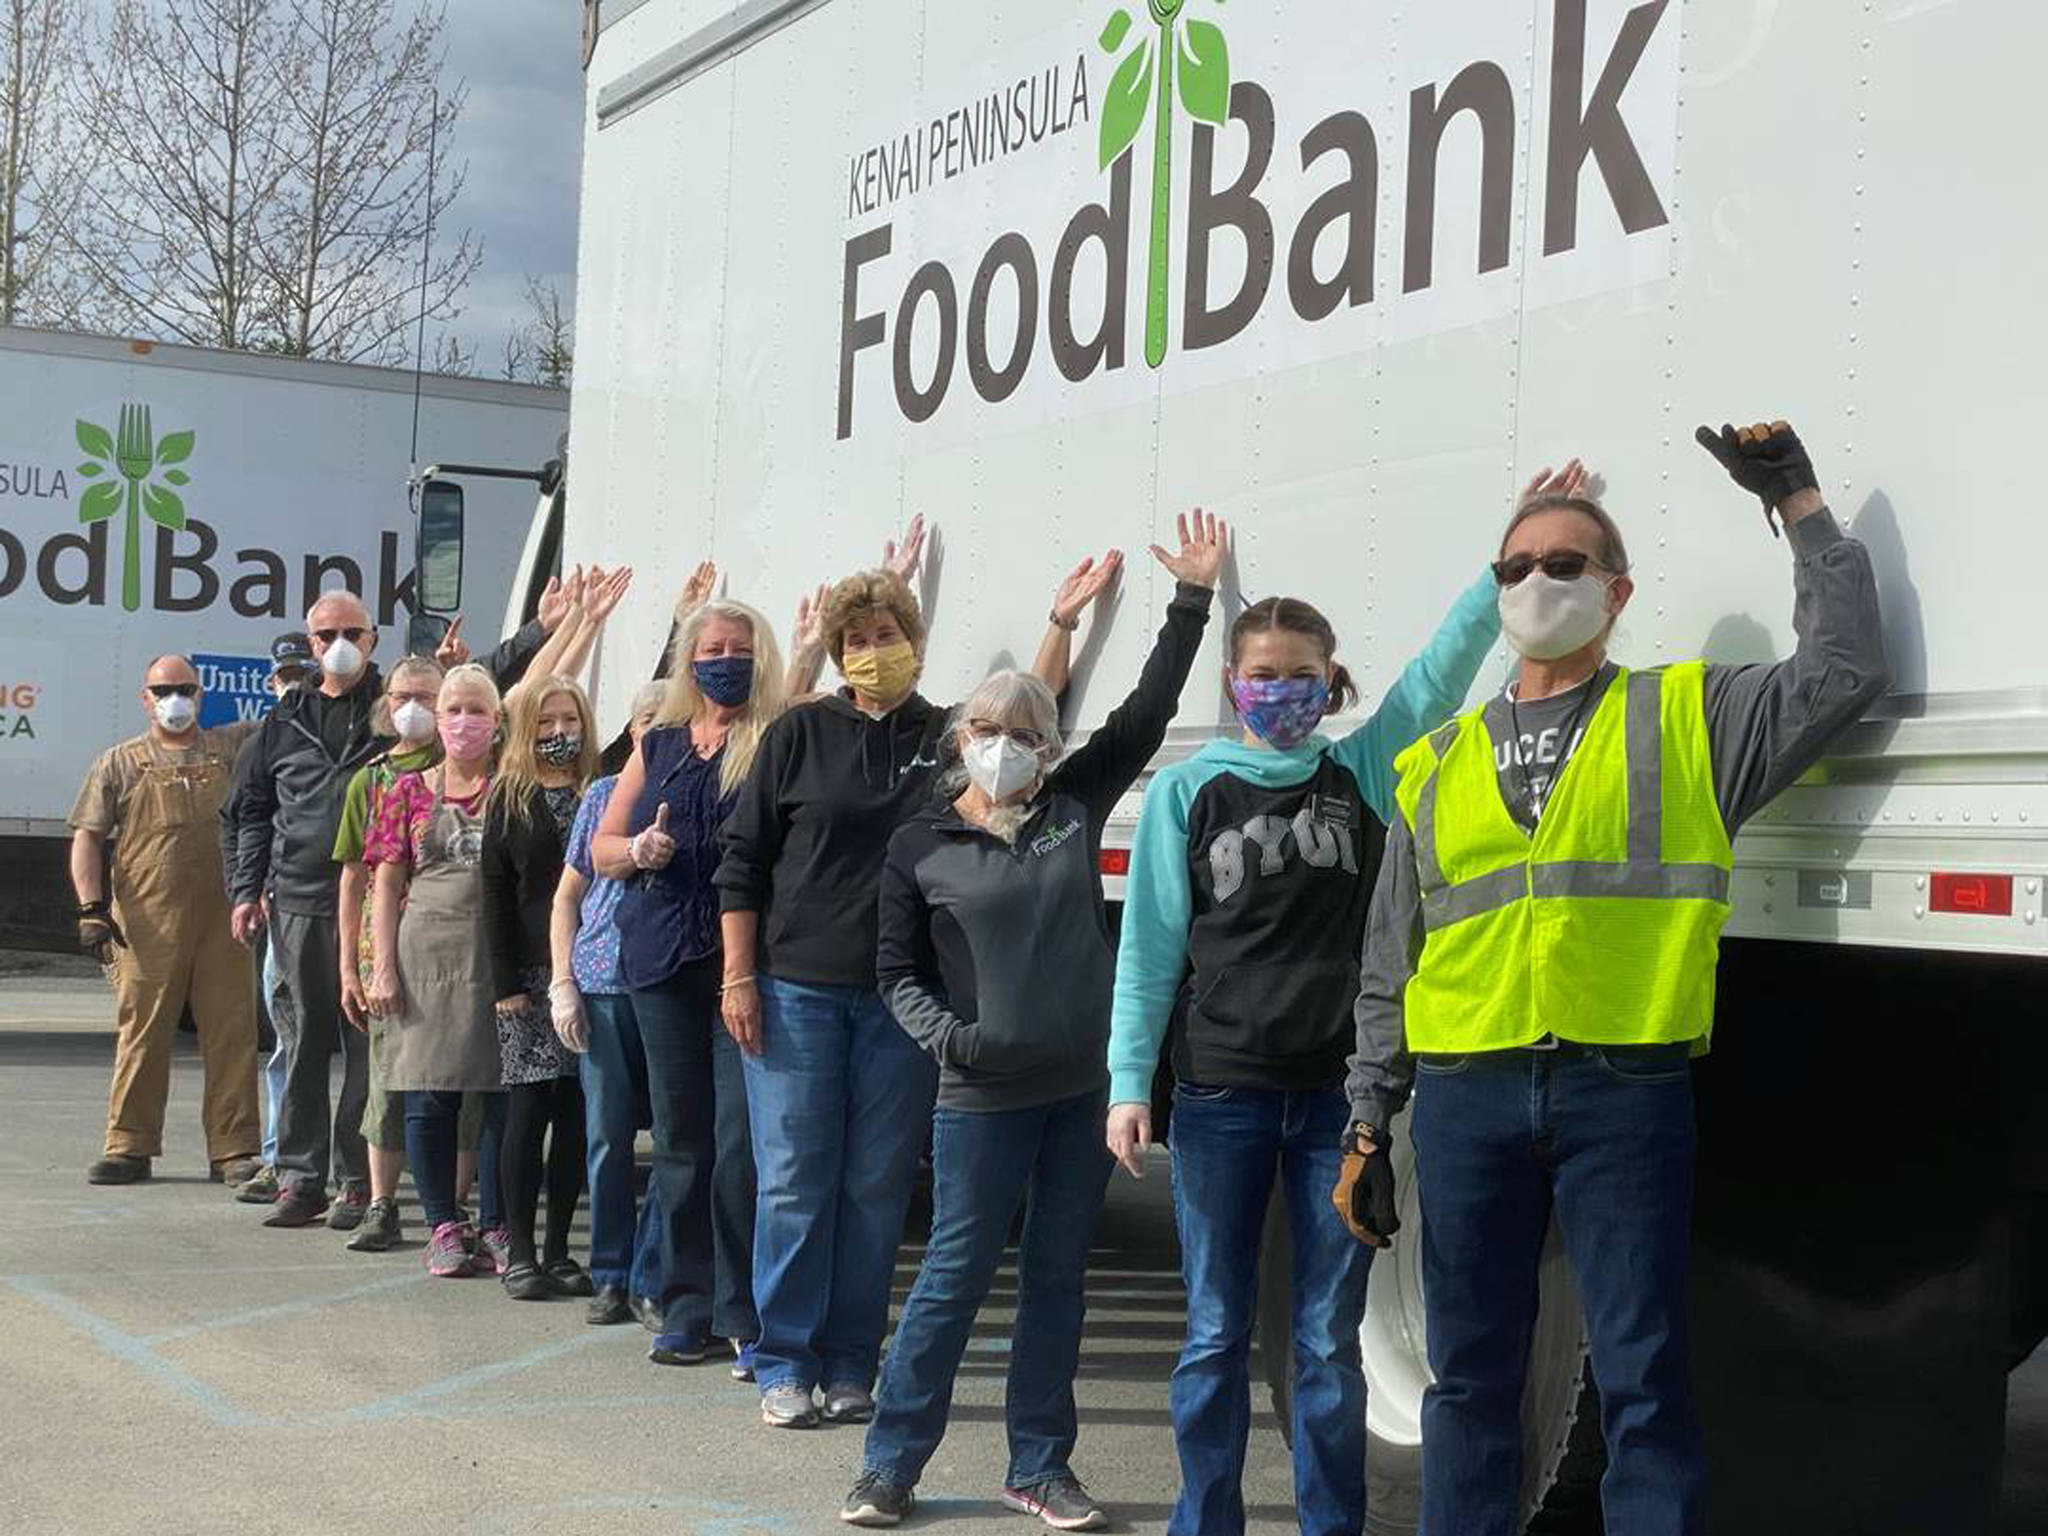 Employees of the Kenai Peninsula Food Bank stand next to their newly acquired delivery truck in Soldotna in this undated photo. (Photo courtesy Greg Meyer/Kenai Peninsula Food Bank)